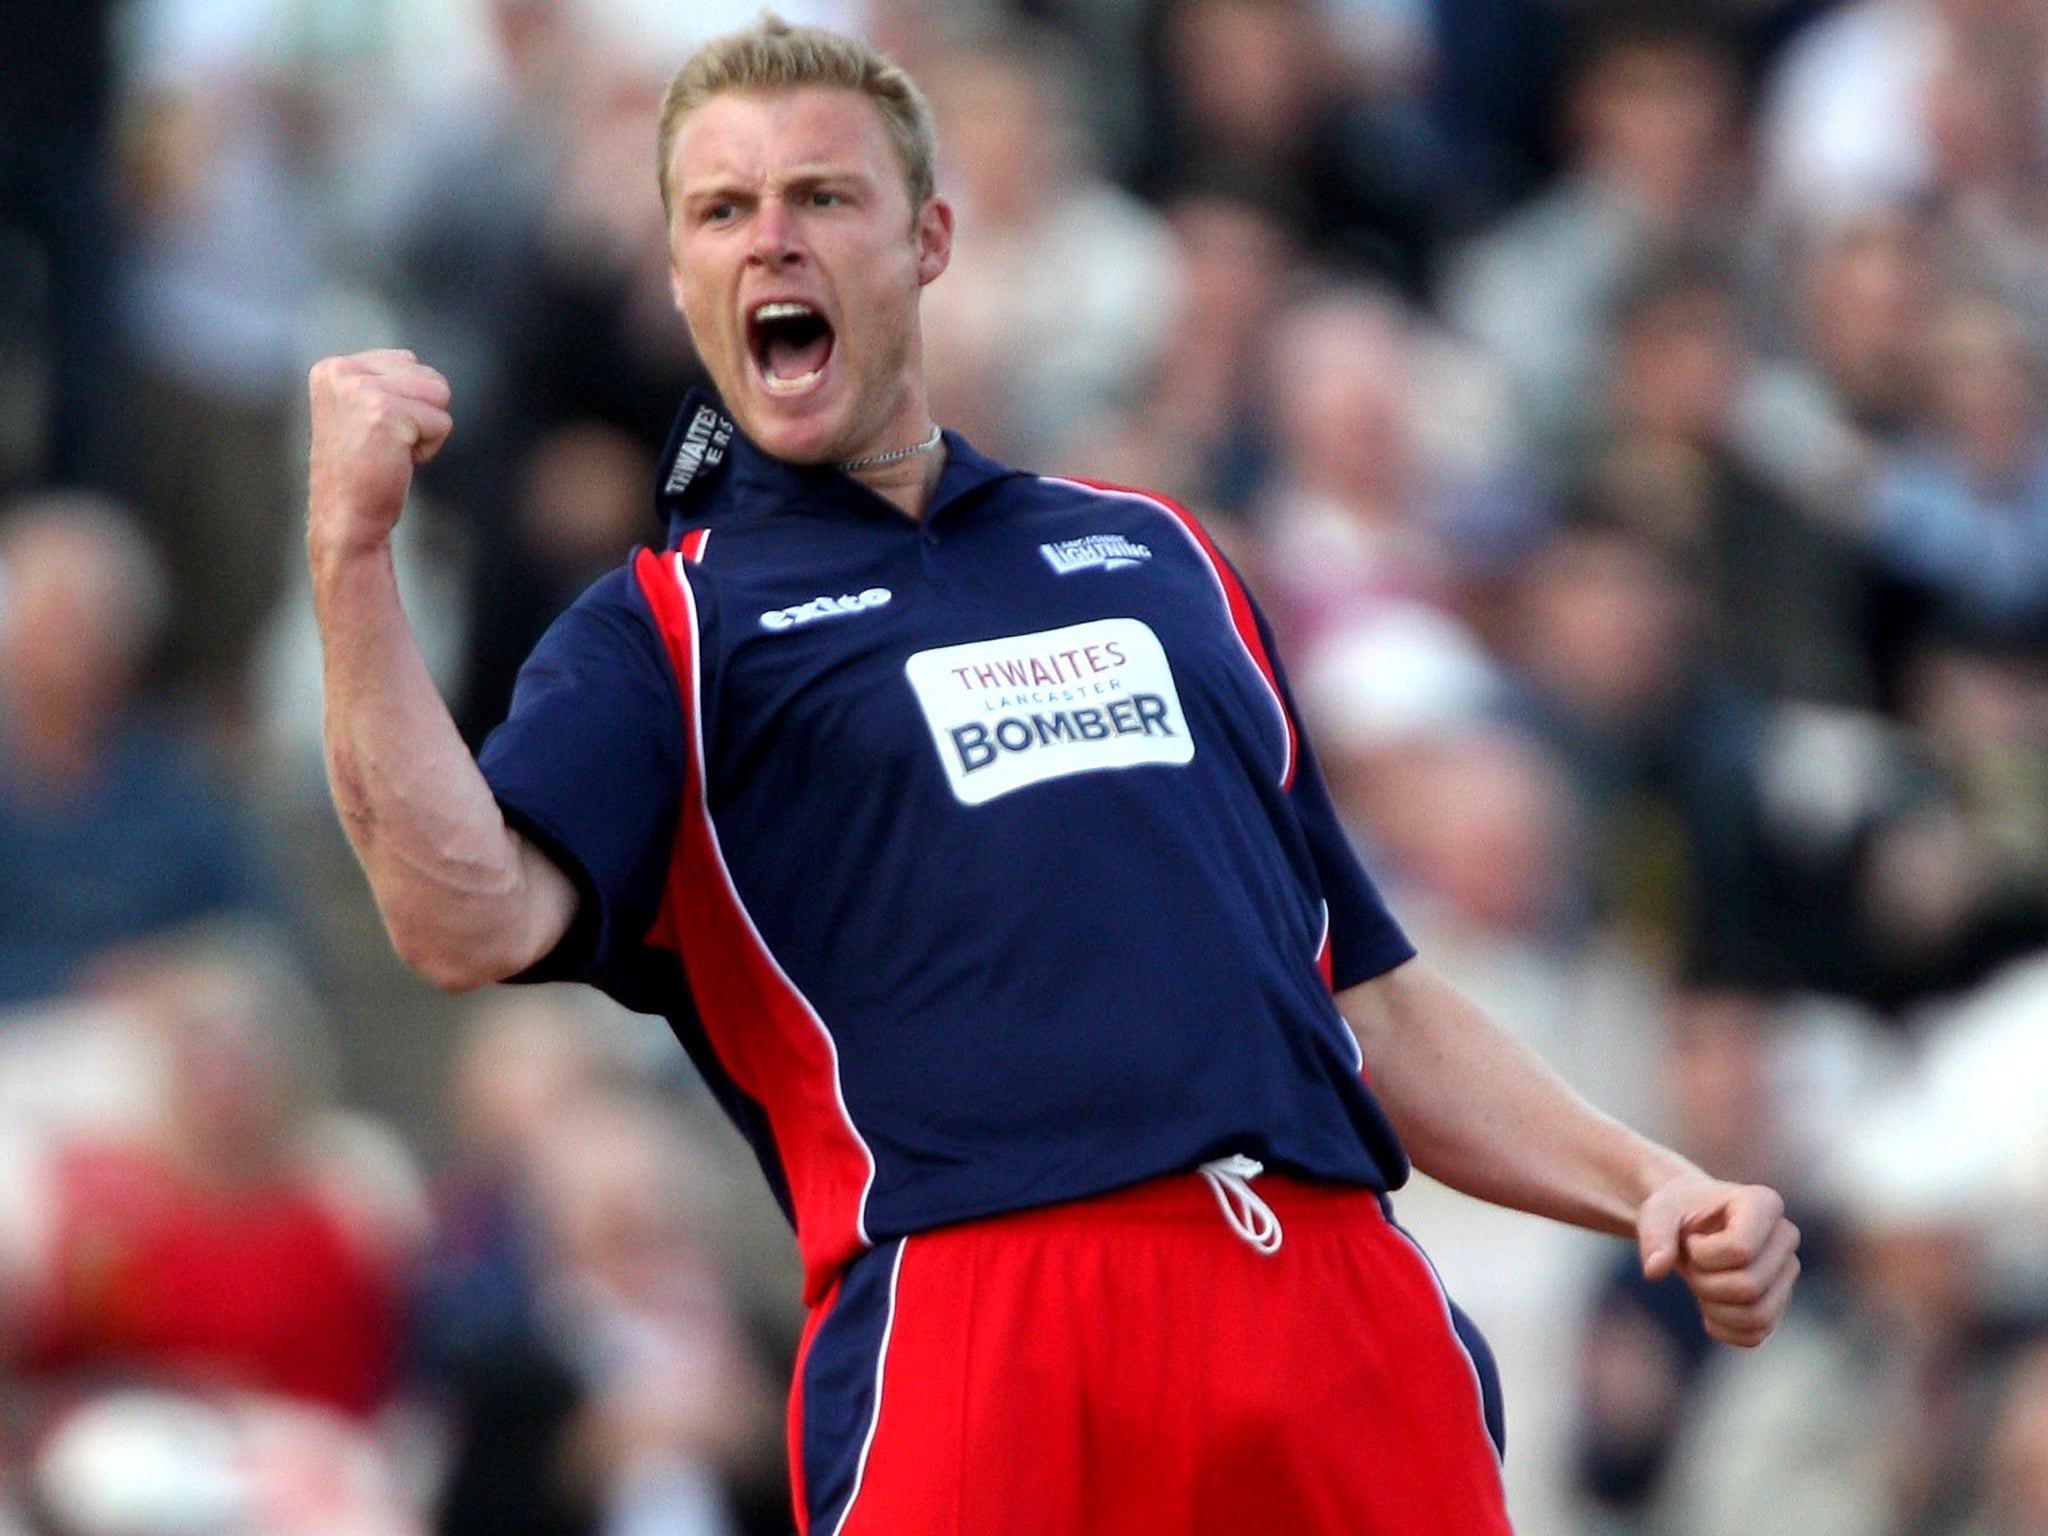 Andrew Flintoff will play T20 for Lancashire